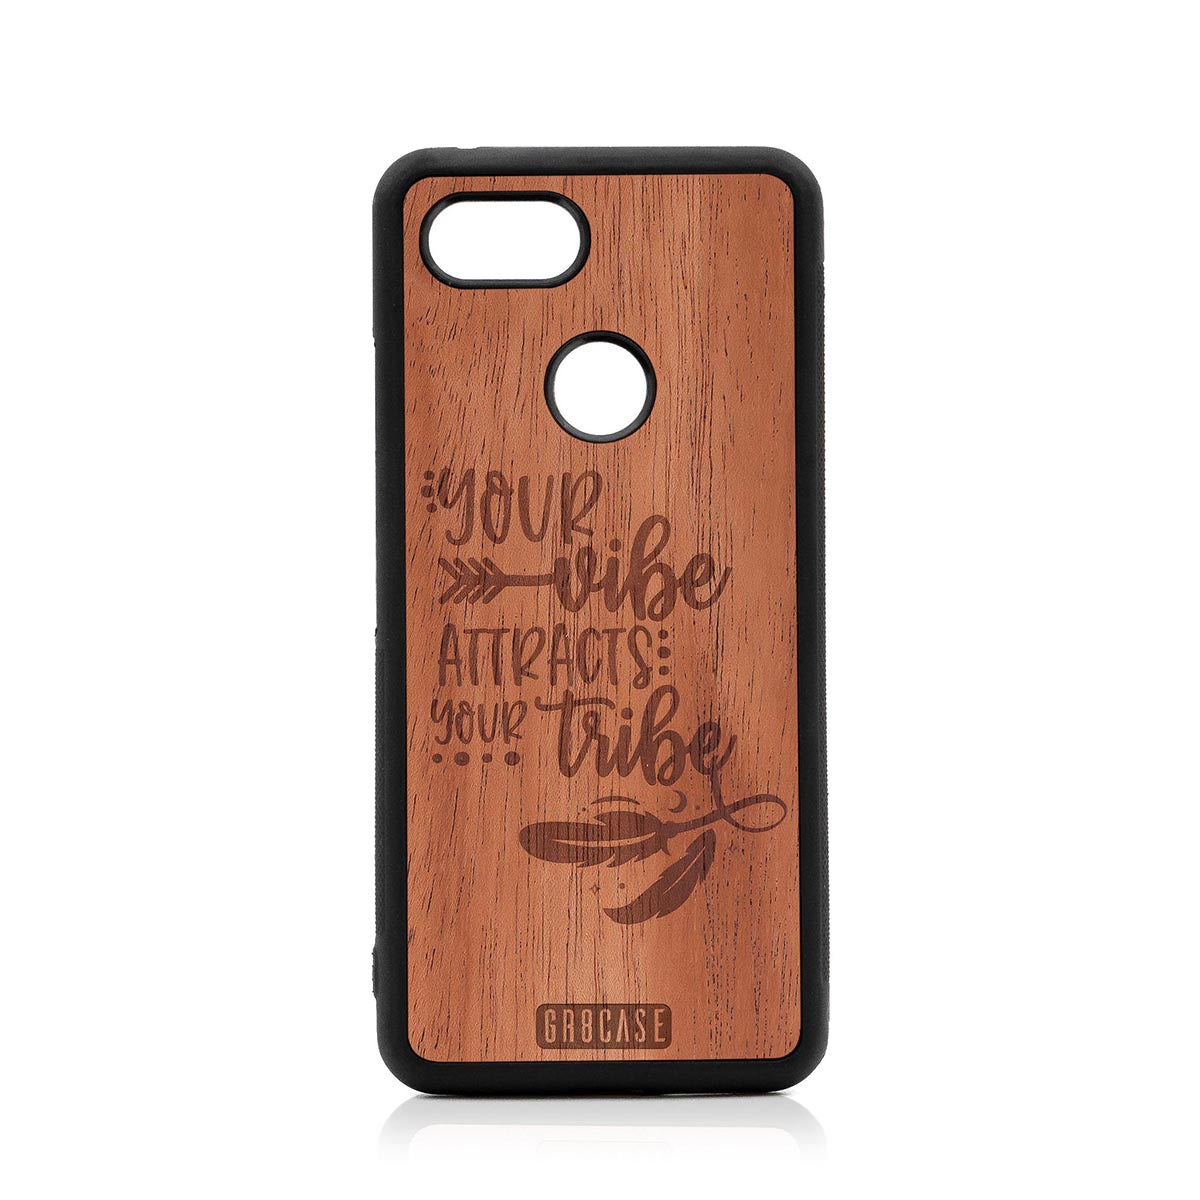 Your Vibe Attracts Your Tribe Design Wood Case Google Pixel 3